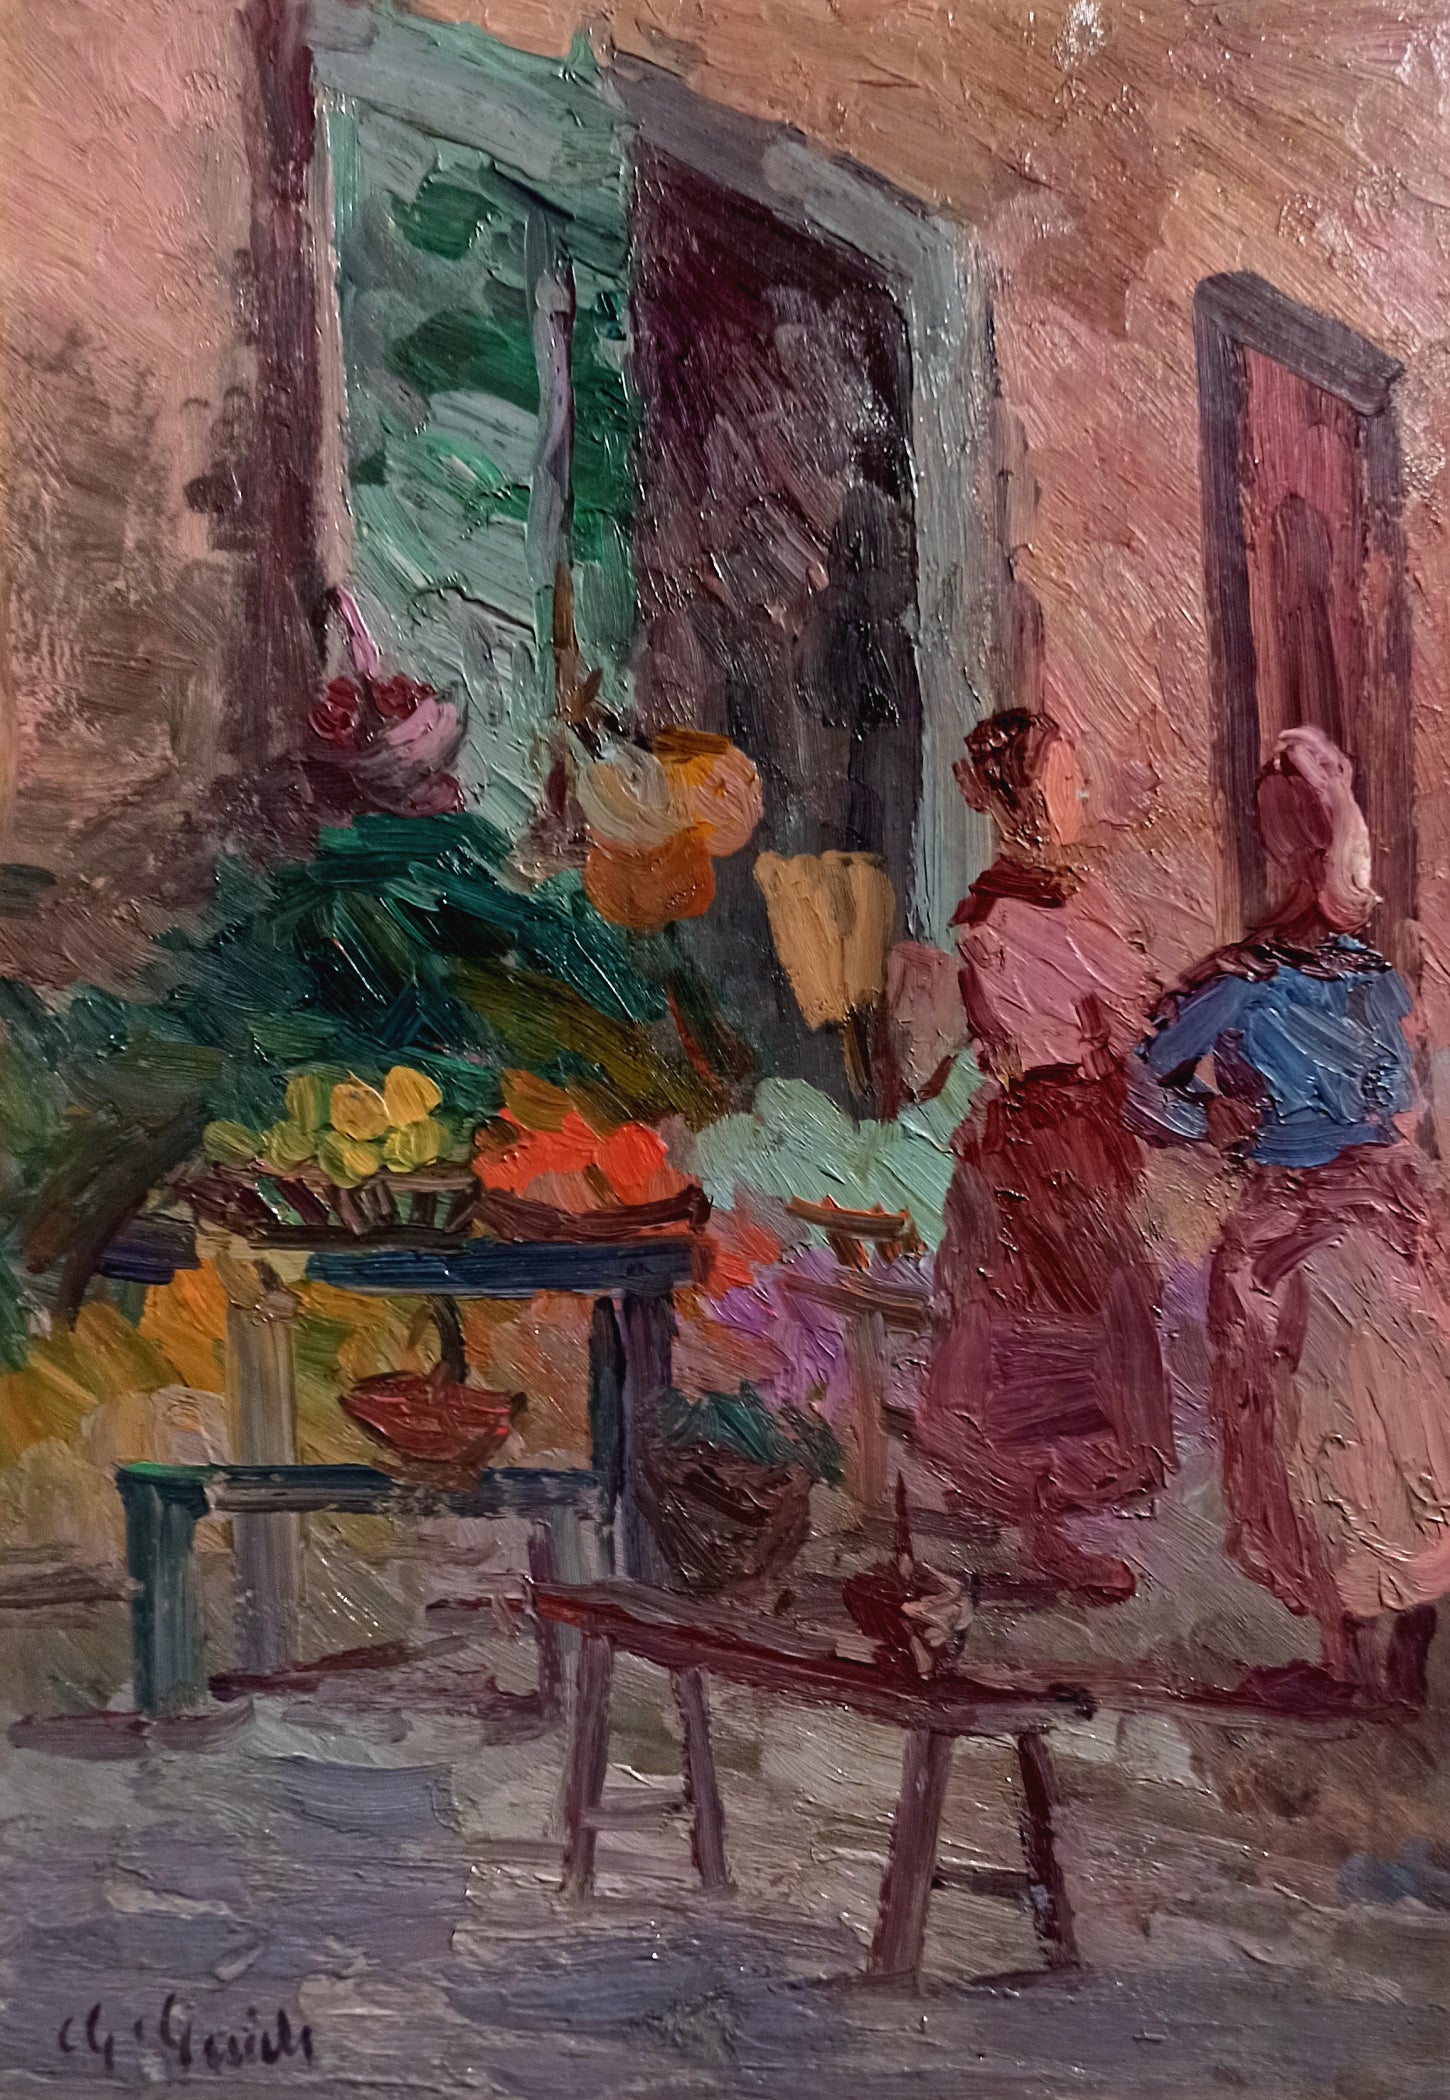 The fruit stand old painting by Guido Guidi 1901 painter original oil Italian vintage artwork